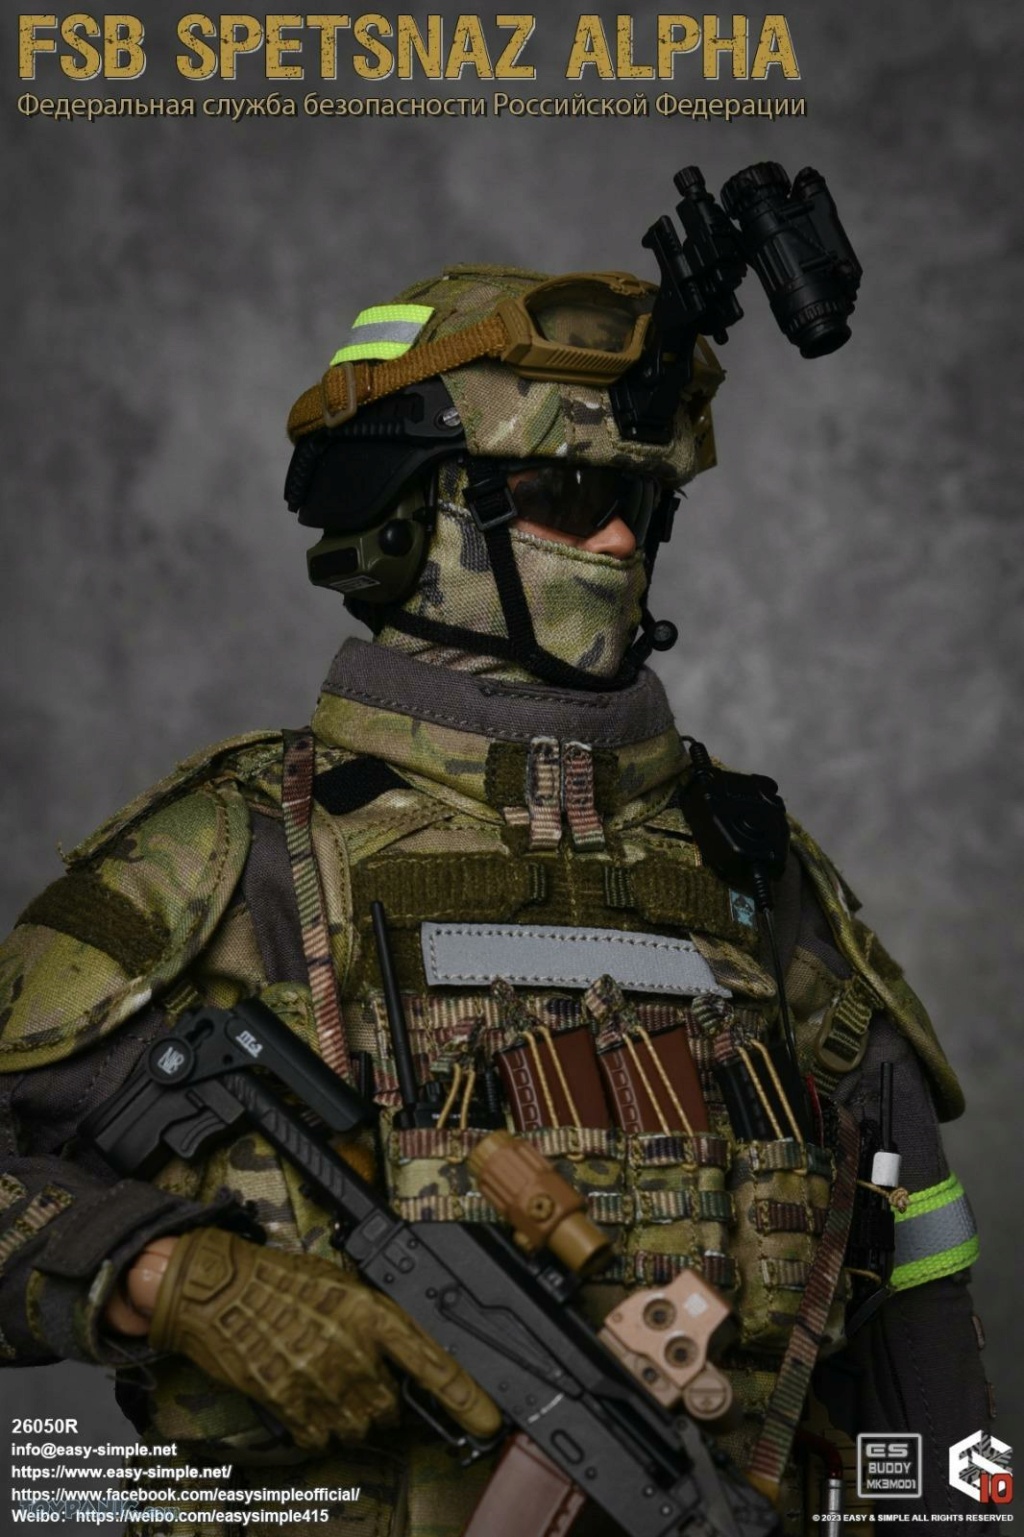 NEW PRODUCT: Easy & Simple: 1/6 Scale FSB Spetsnaz Alpha (ES26050R) 30320248